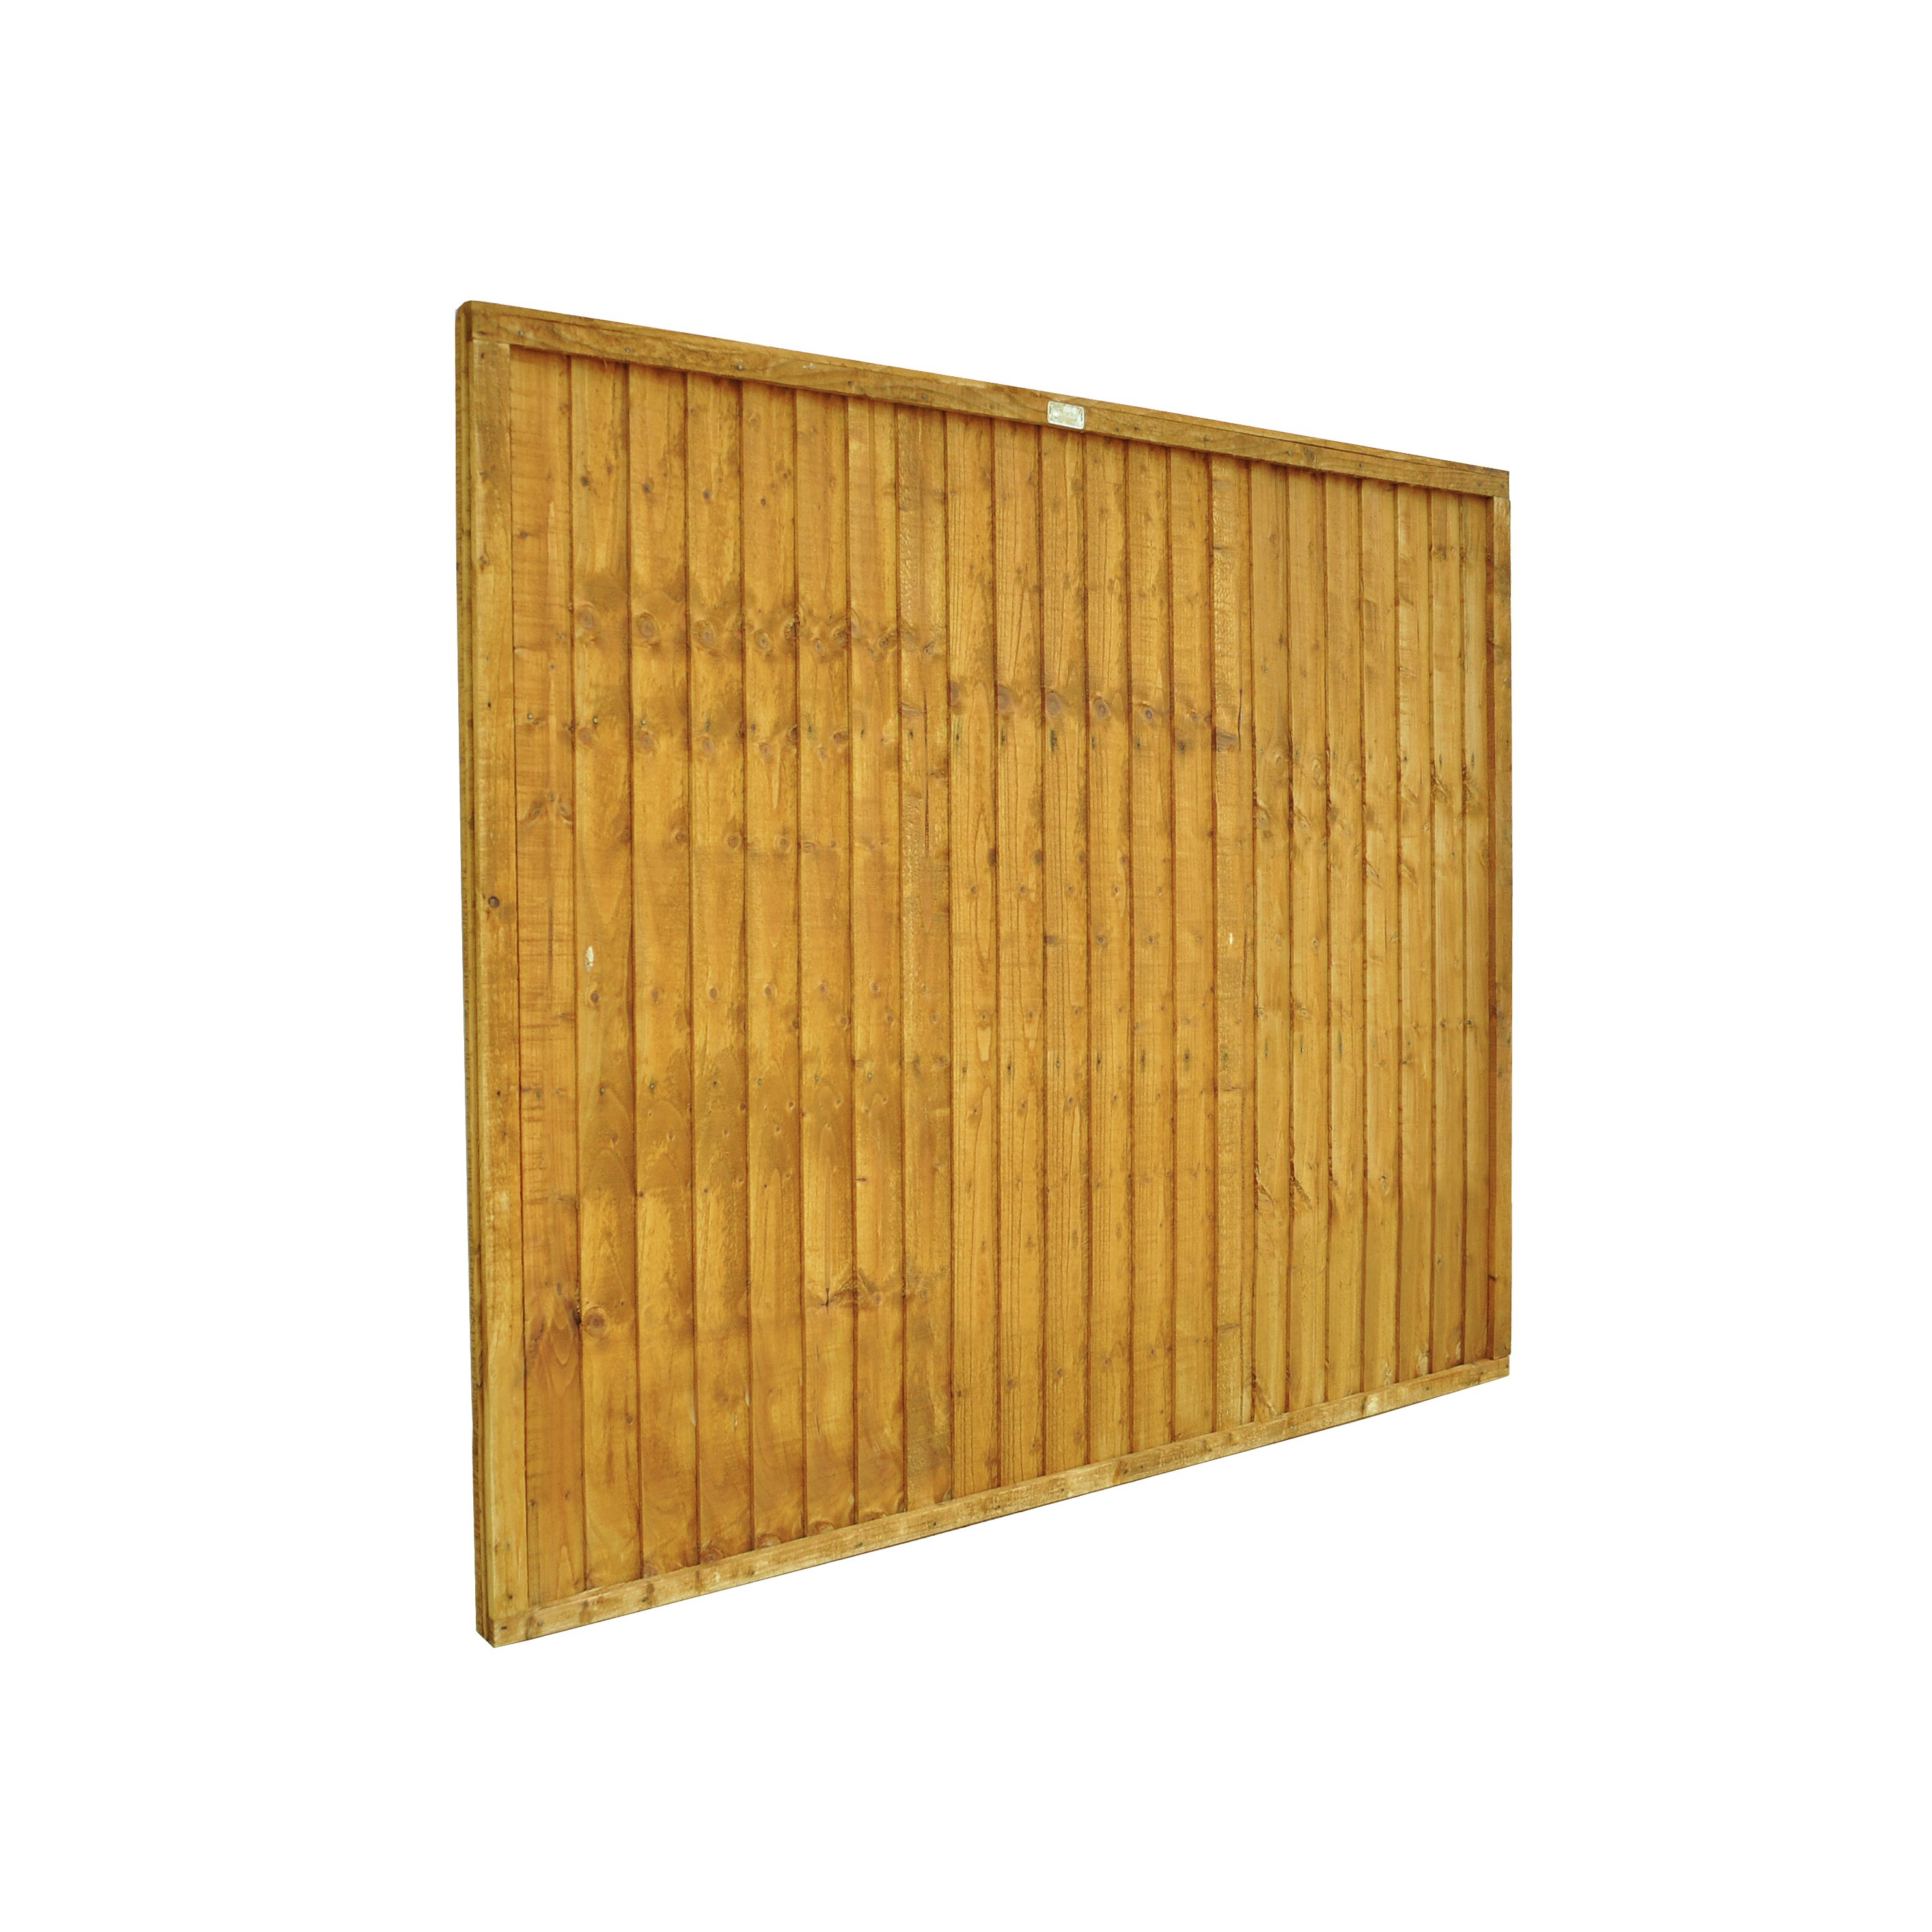 Forest 5ft (1.52m) Closeboard Fence Panel - Pack of 3